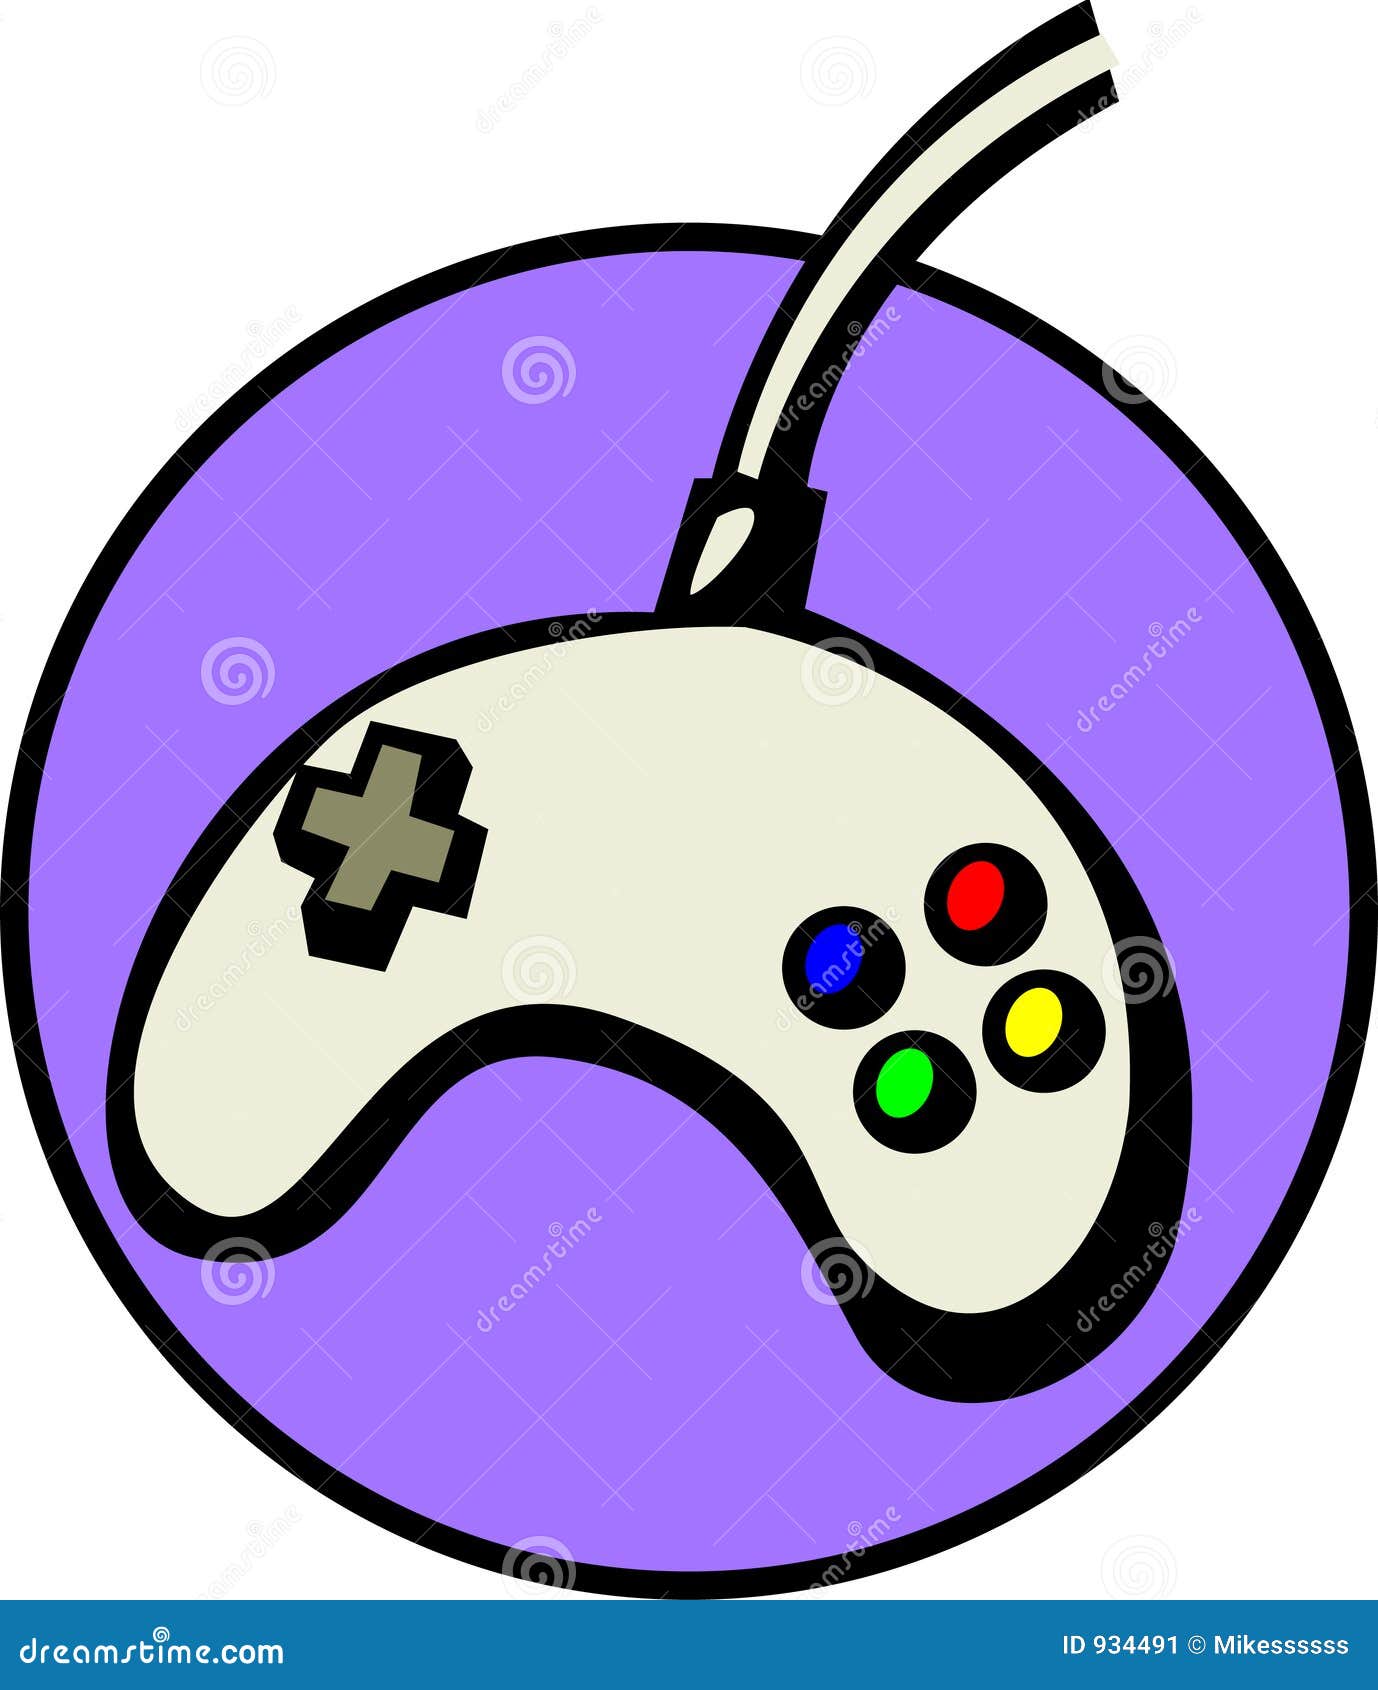 video game clipart images - photo #26